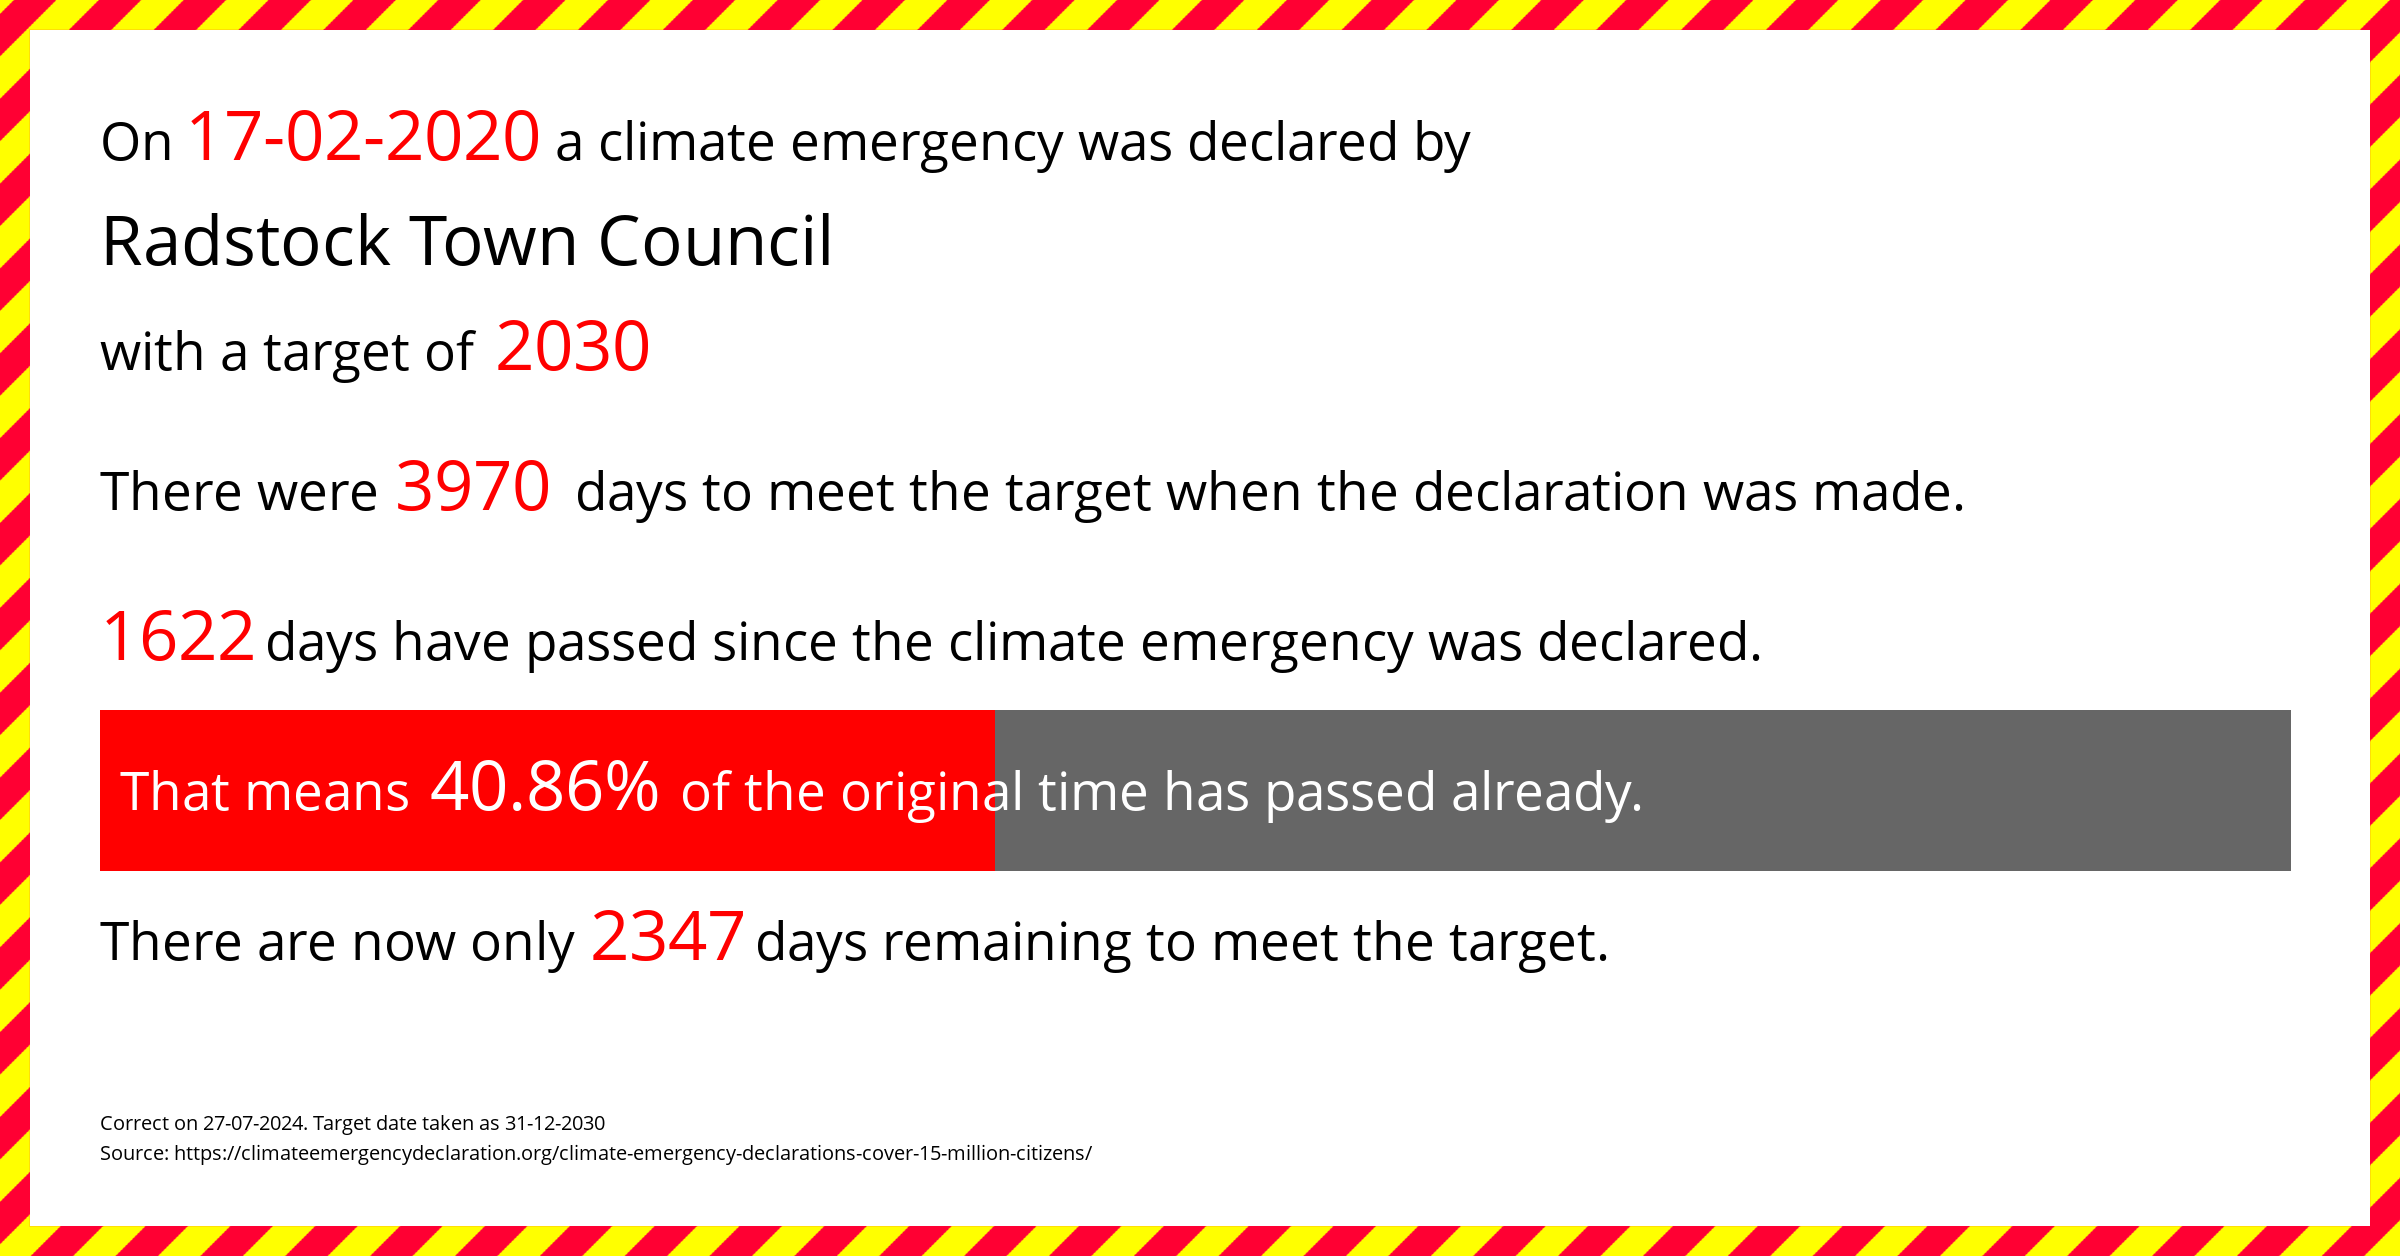 Radstock Town Council declared a Climate emergency on Monday 17th February 2020, with a target of 2030.